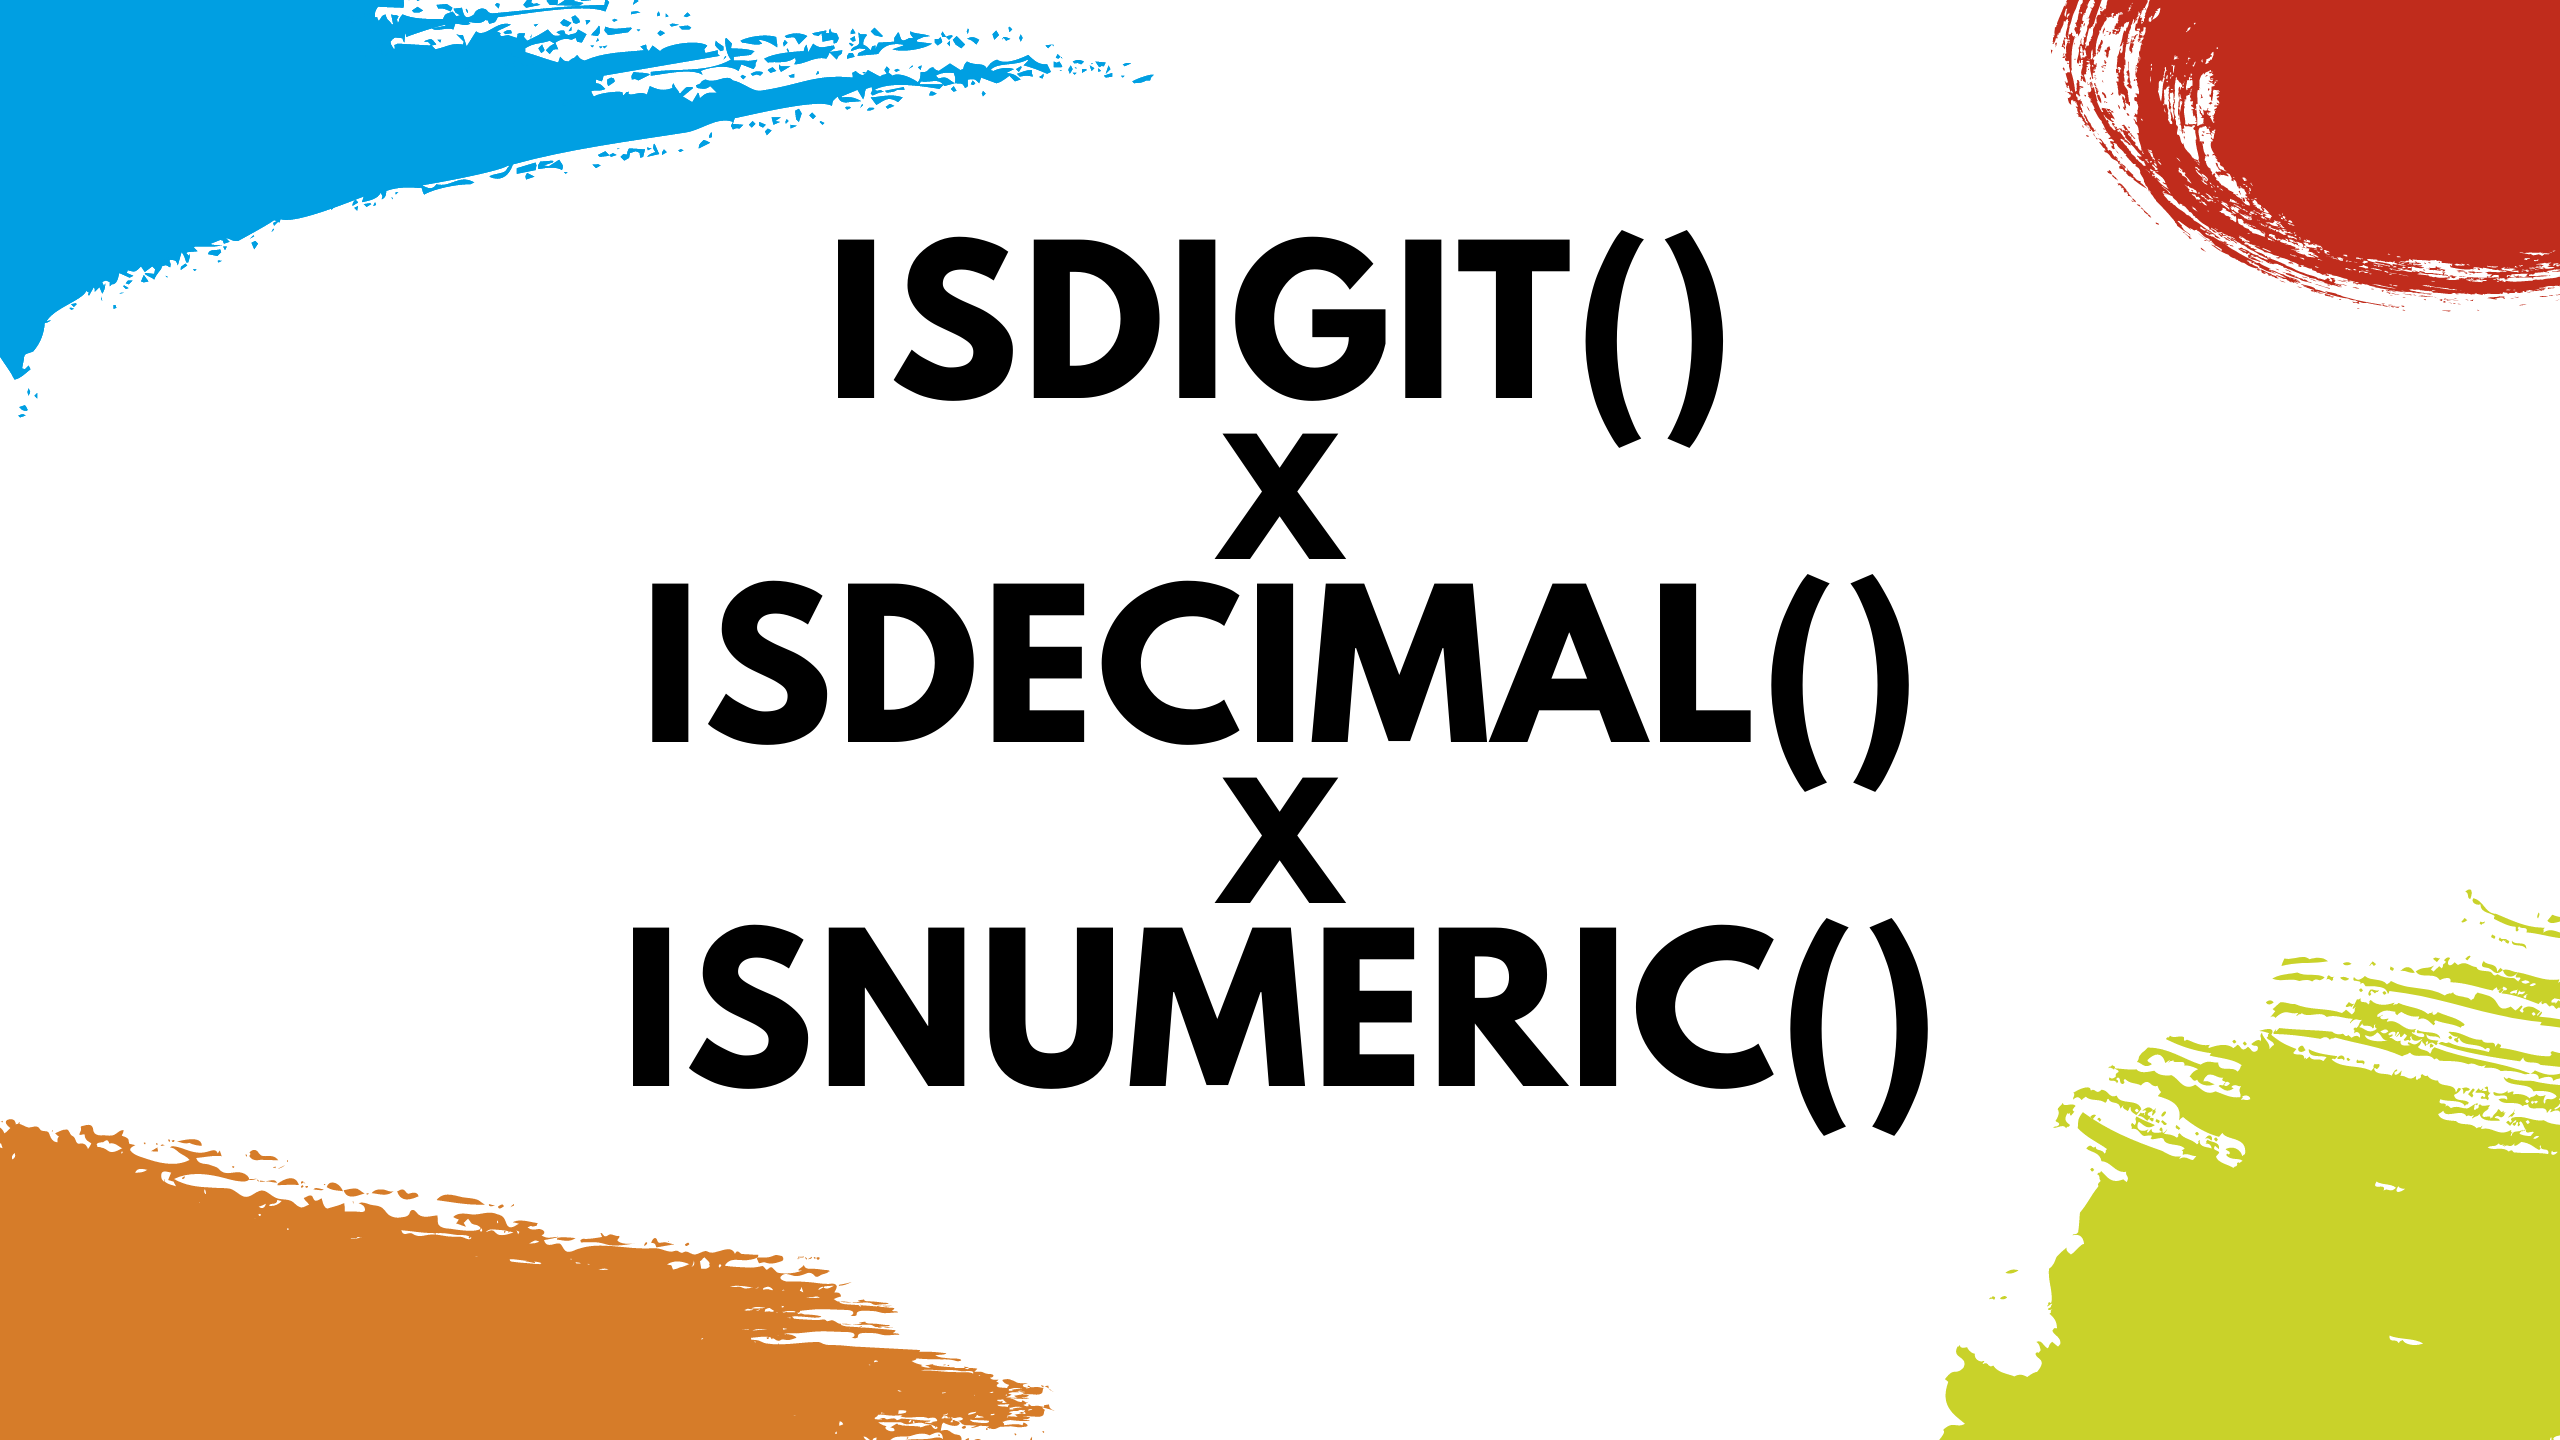 How to Choose Between isdigit(), isdecimal() and isnumeric() in Python